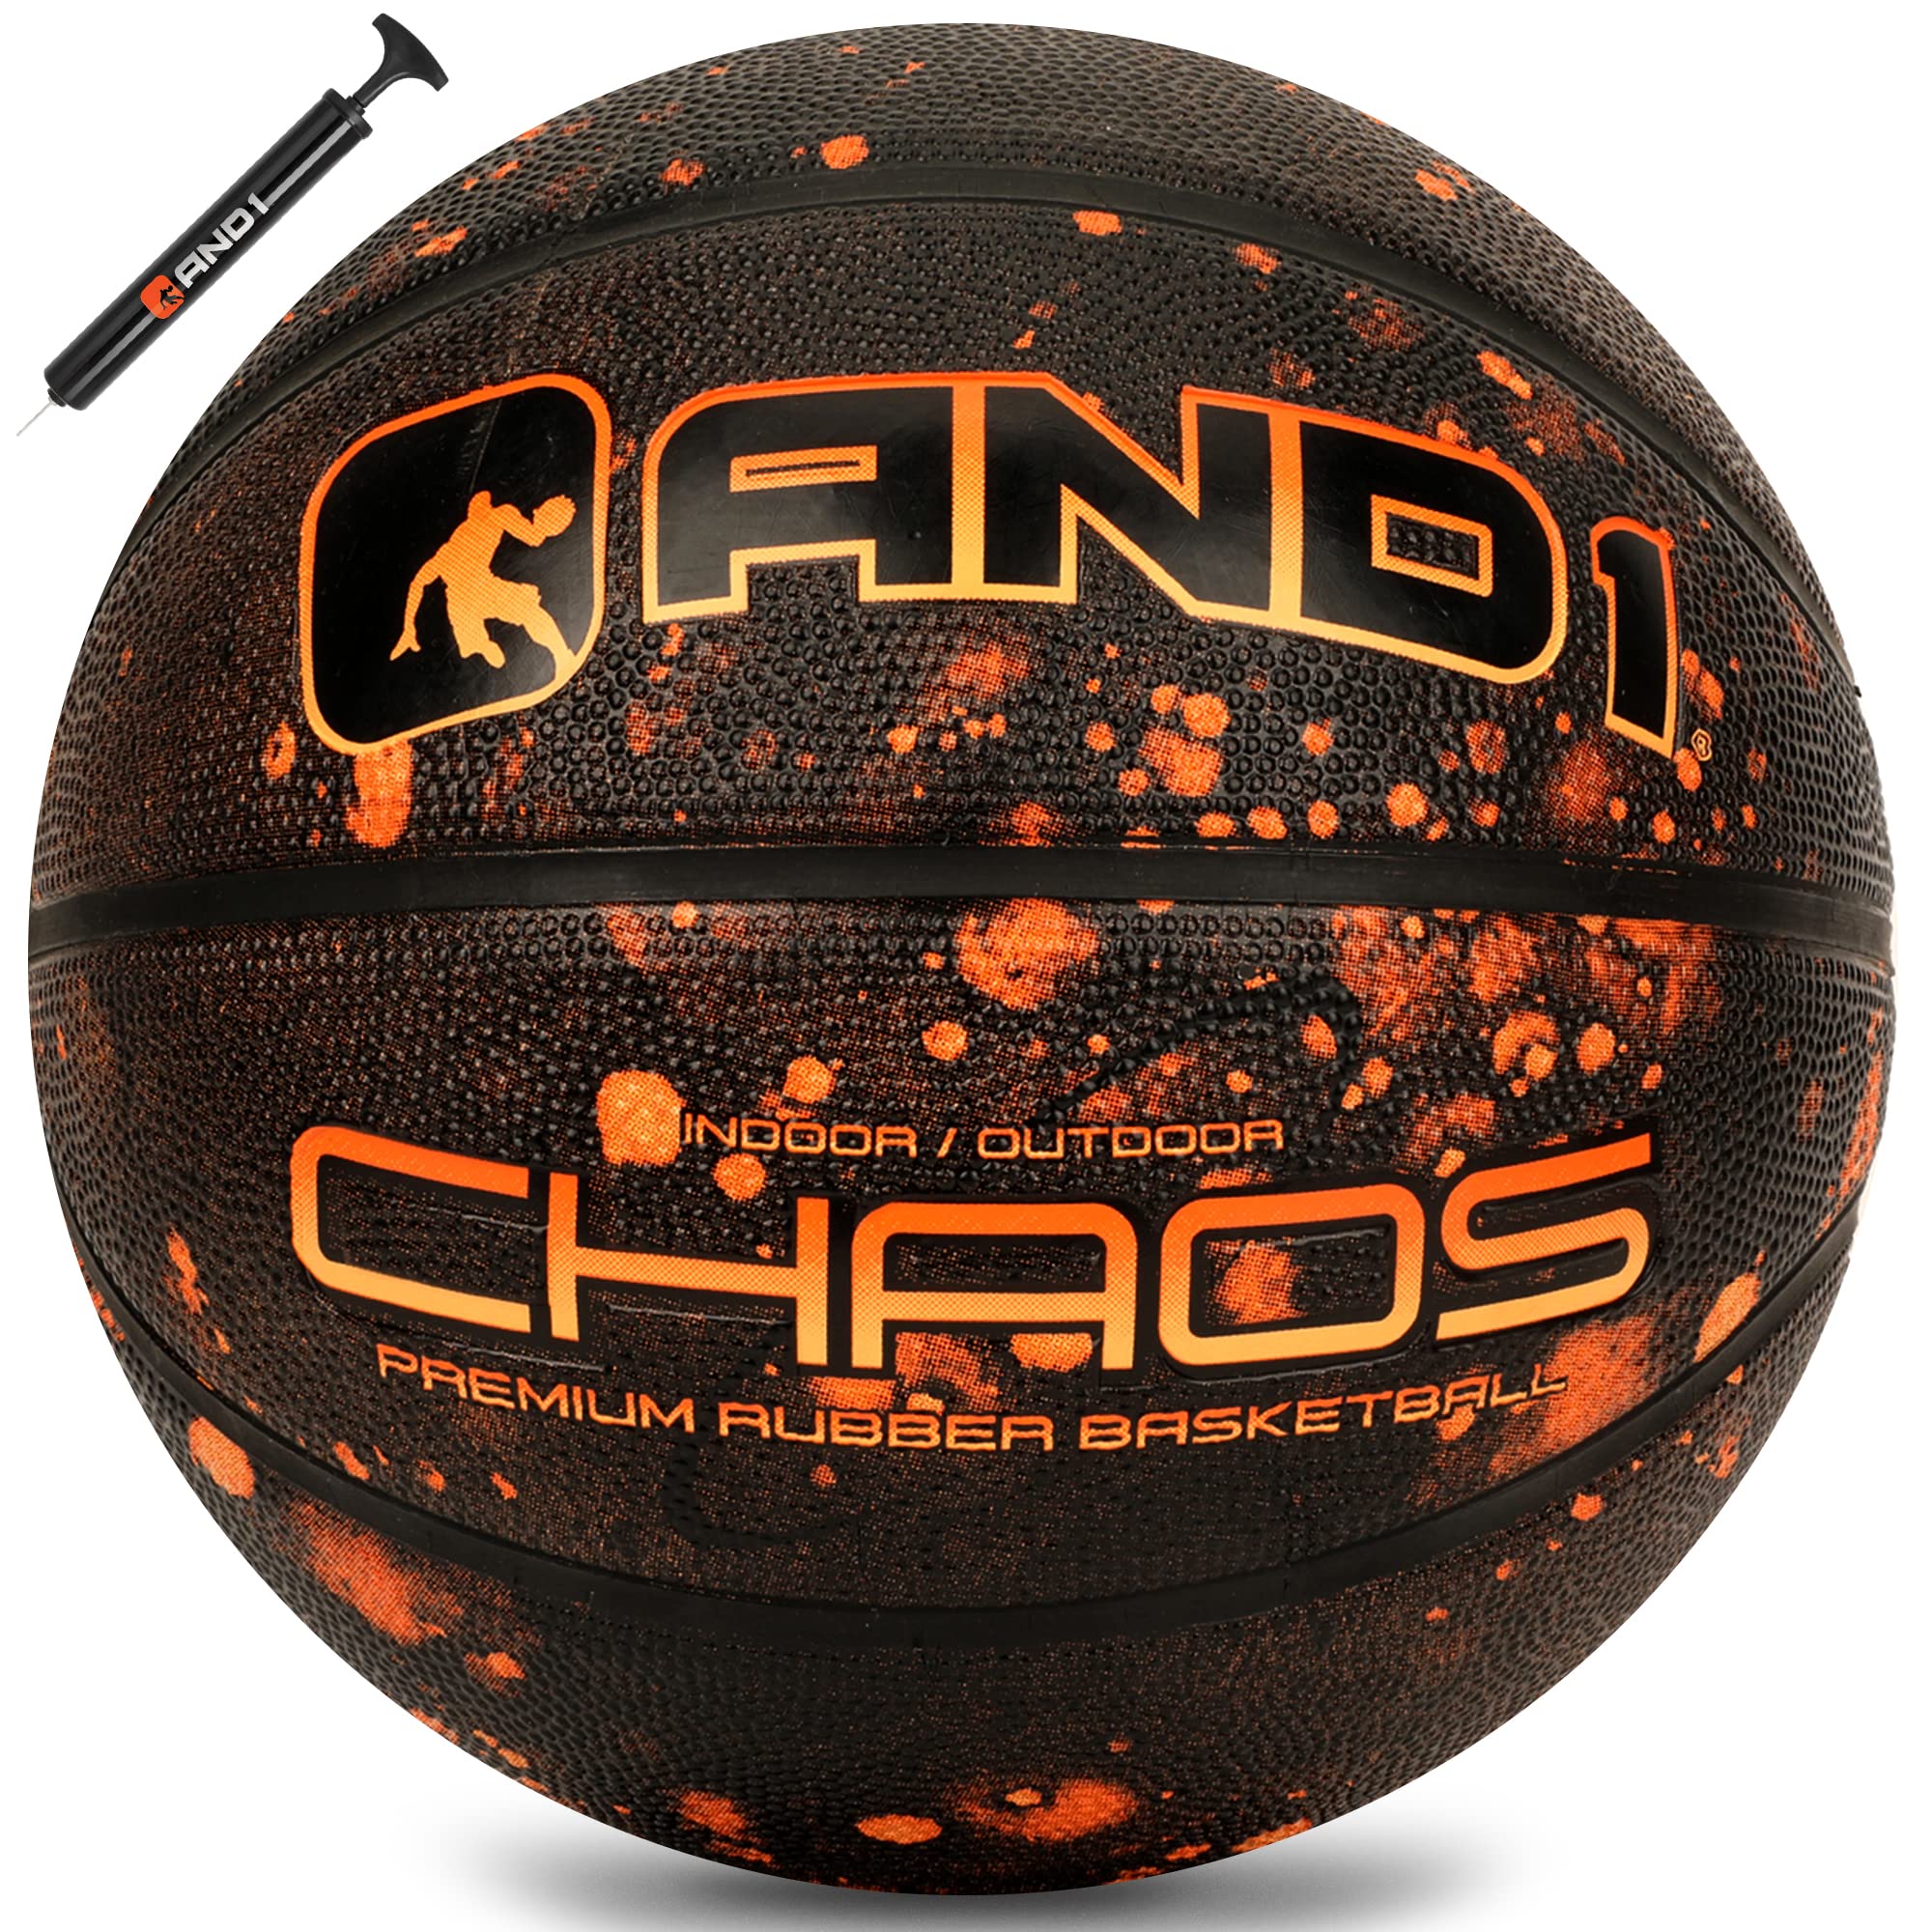 AND1 Chaos Basketball: Official Regulation Size 7 (29.5 inches) Rubber Basketball - Deep Channel Construction Streetball, Made for Indoor Outdoor Basketball Games